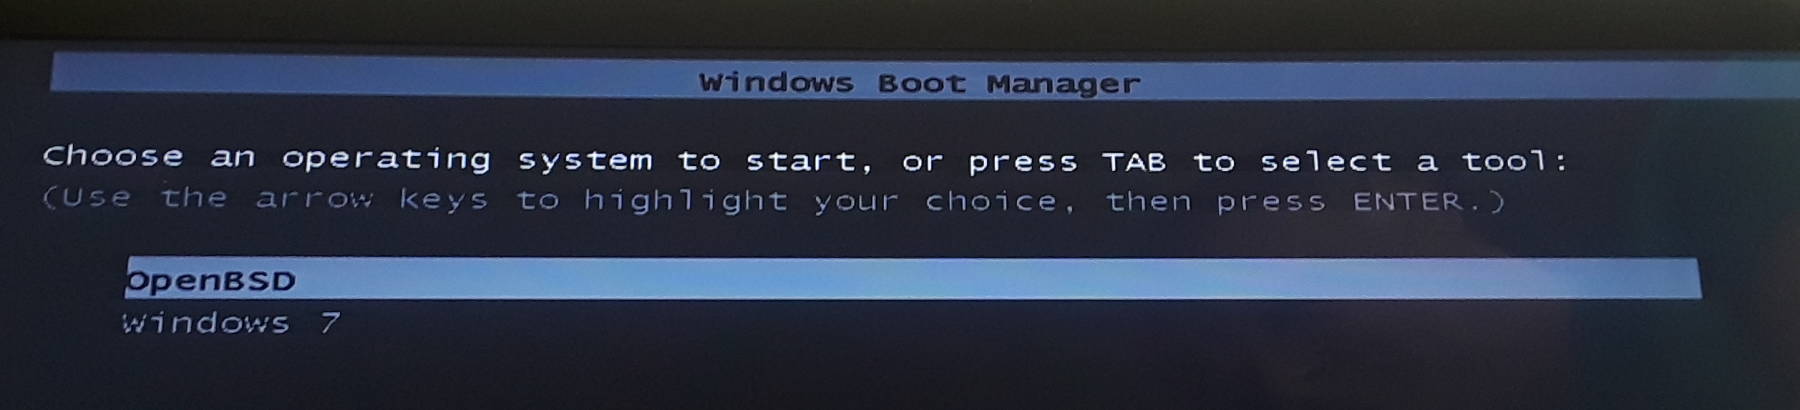 Windows boot loader with a choice of Windows 7 and OpenBSD.